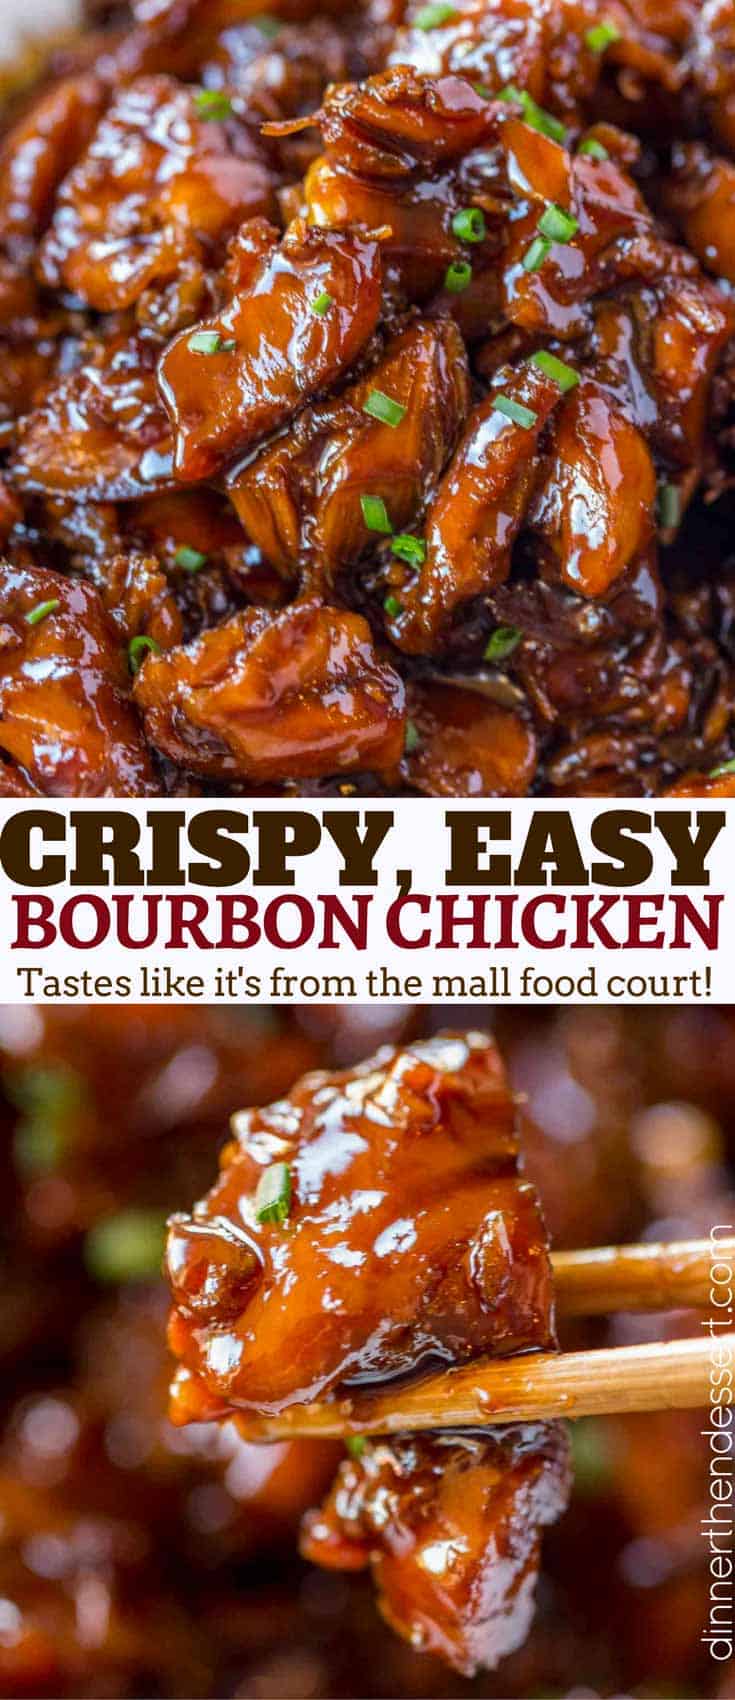 Where Can I Buy Bourbon Chicken Sauce? 